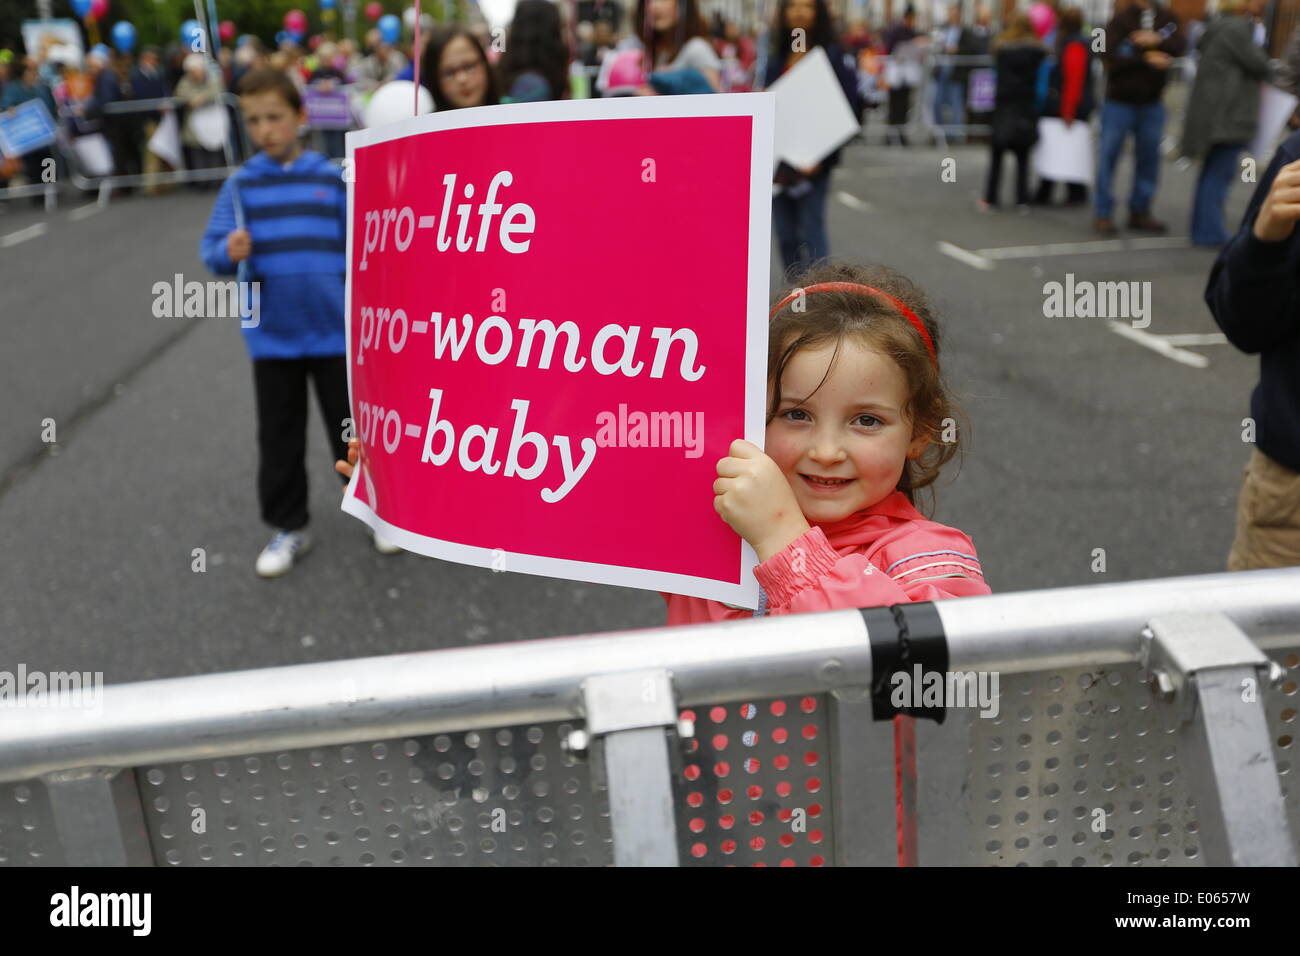 Dublin, Ireland. 3rd May 2014. A little girl holds an anti-abortion poster at the 'National Vigil for Life'.  Thousands turned up for the 'National Vigil for Life' in Dublin's Merrion Square to call politicians for a repeal of the Protection of Life During Pregnancy Bill 2013 which allows abortion in Ireland in limited circumstances. Stock Photo